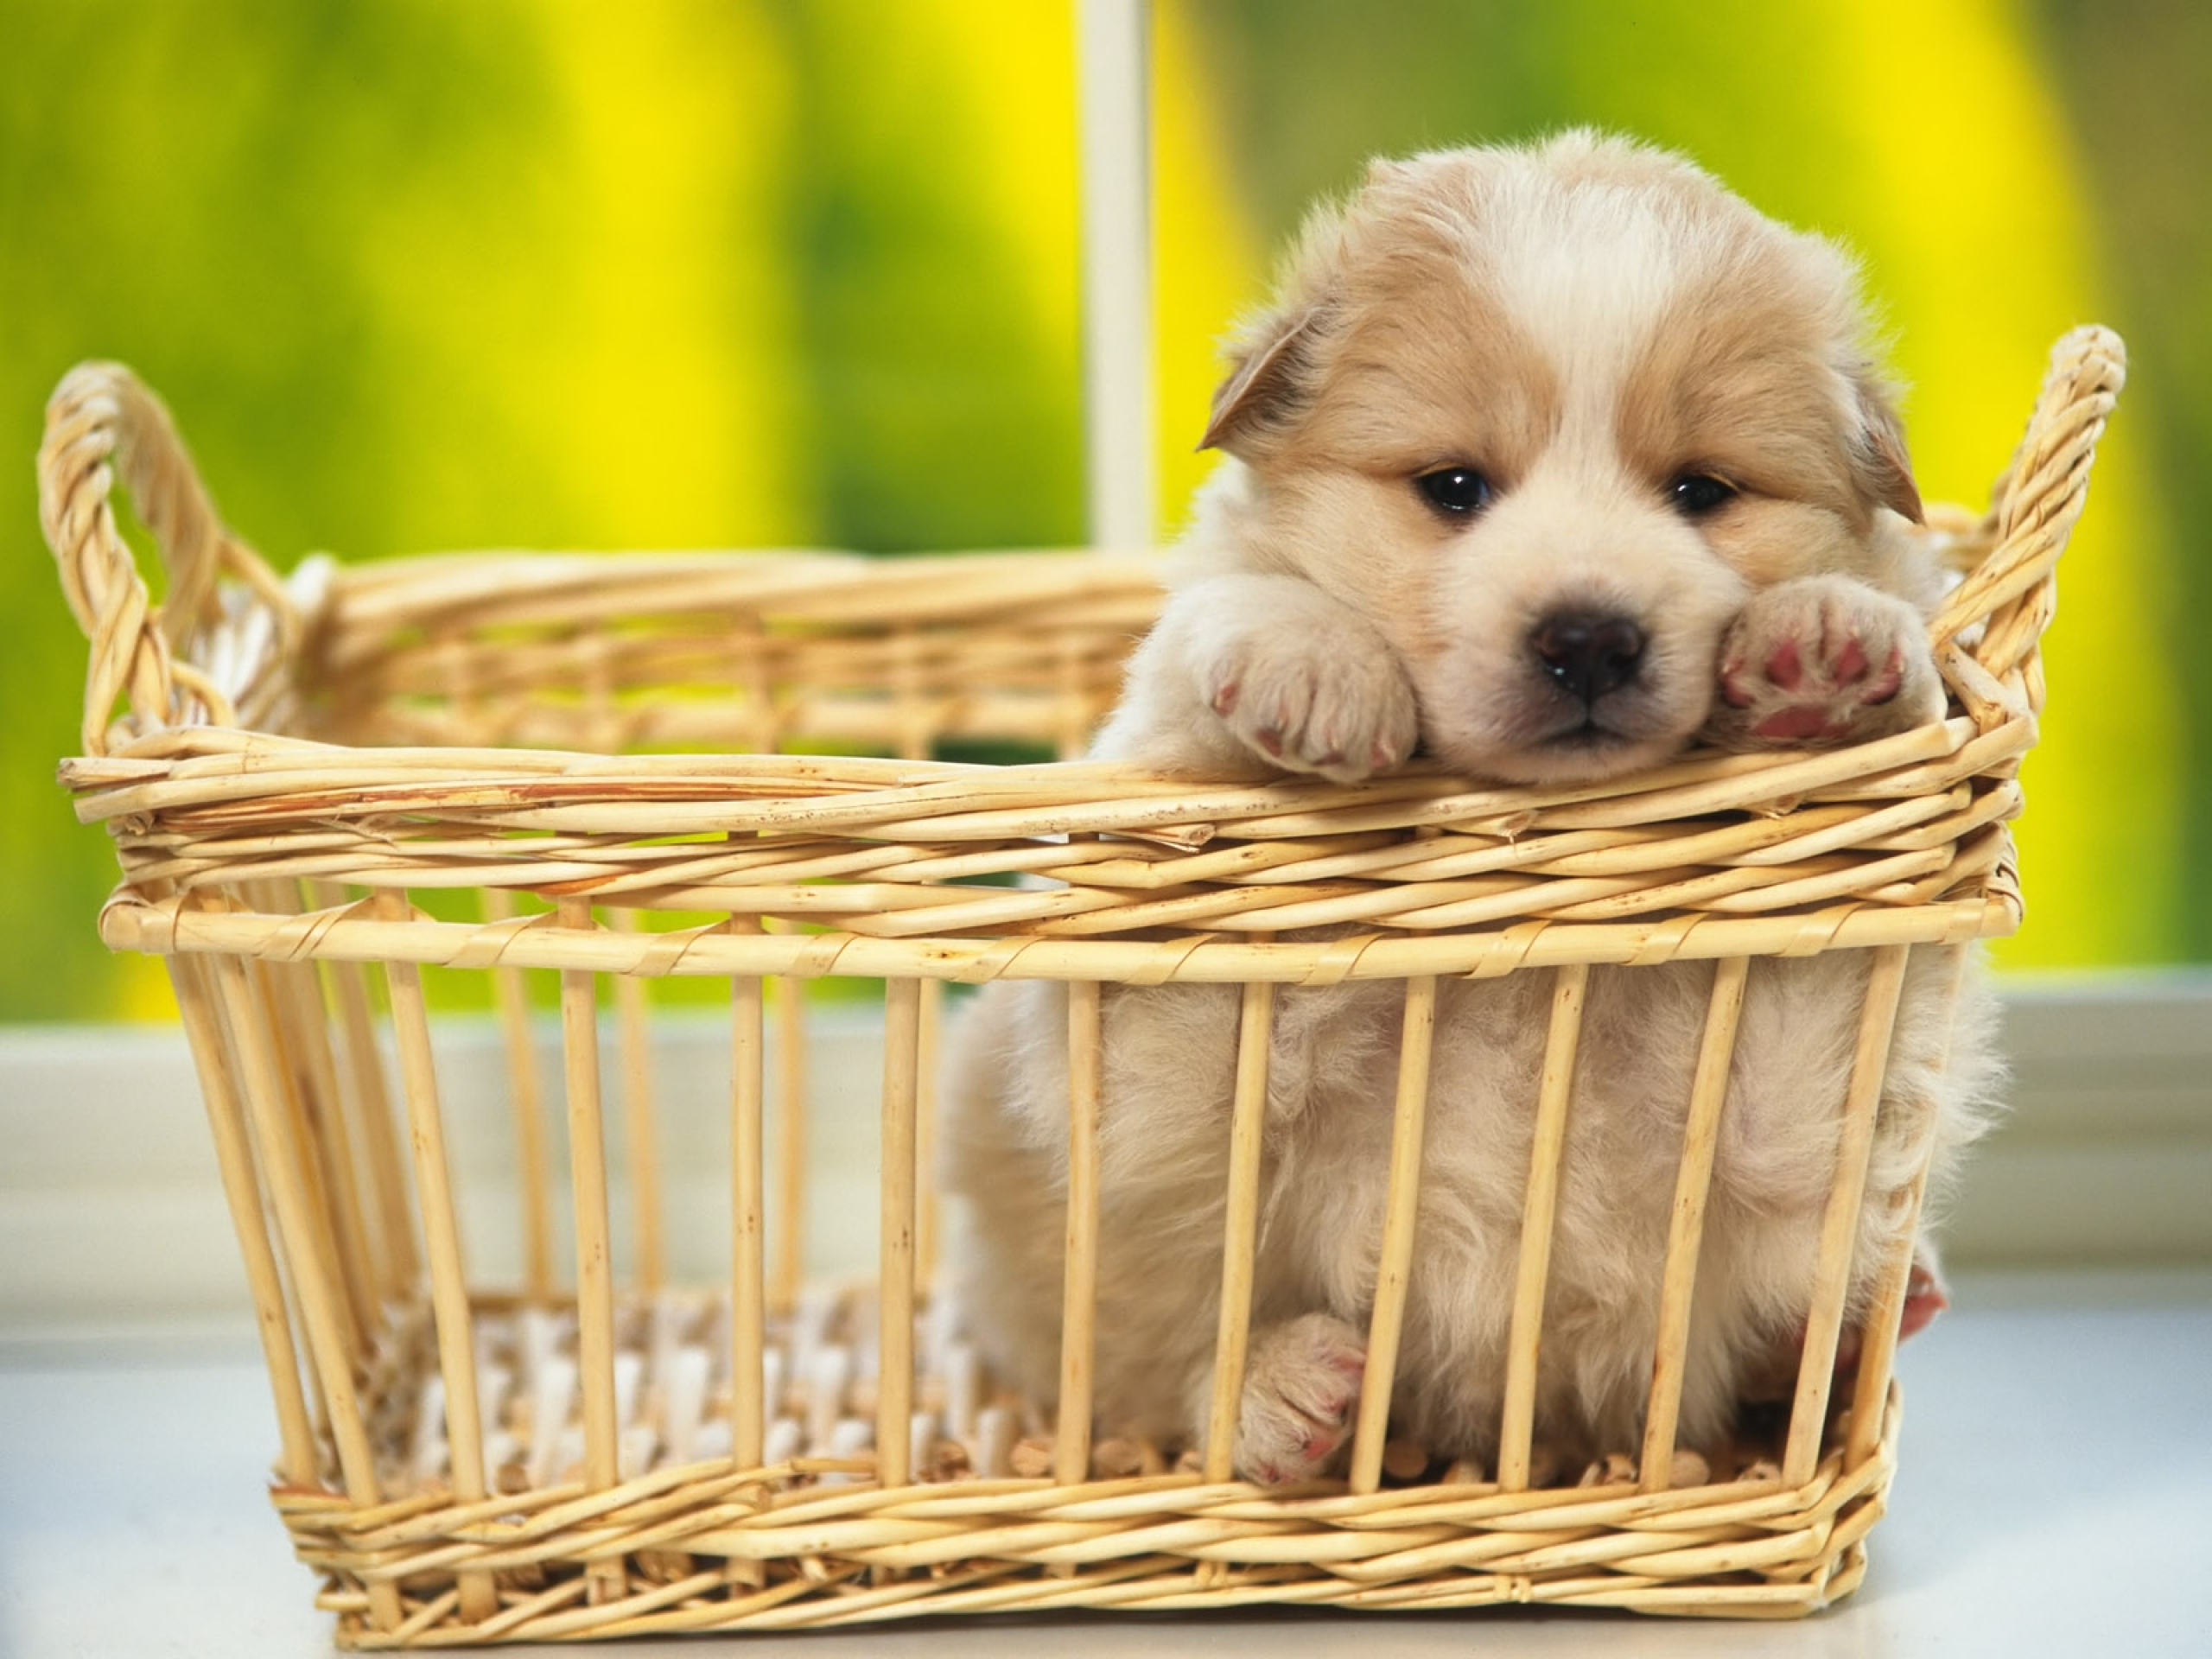 2560x1920 1300+ Puppy HD Wallpapers and Backgrounds